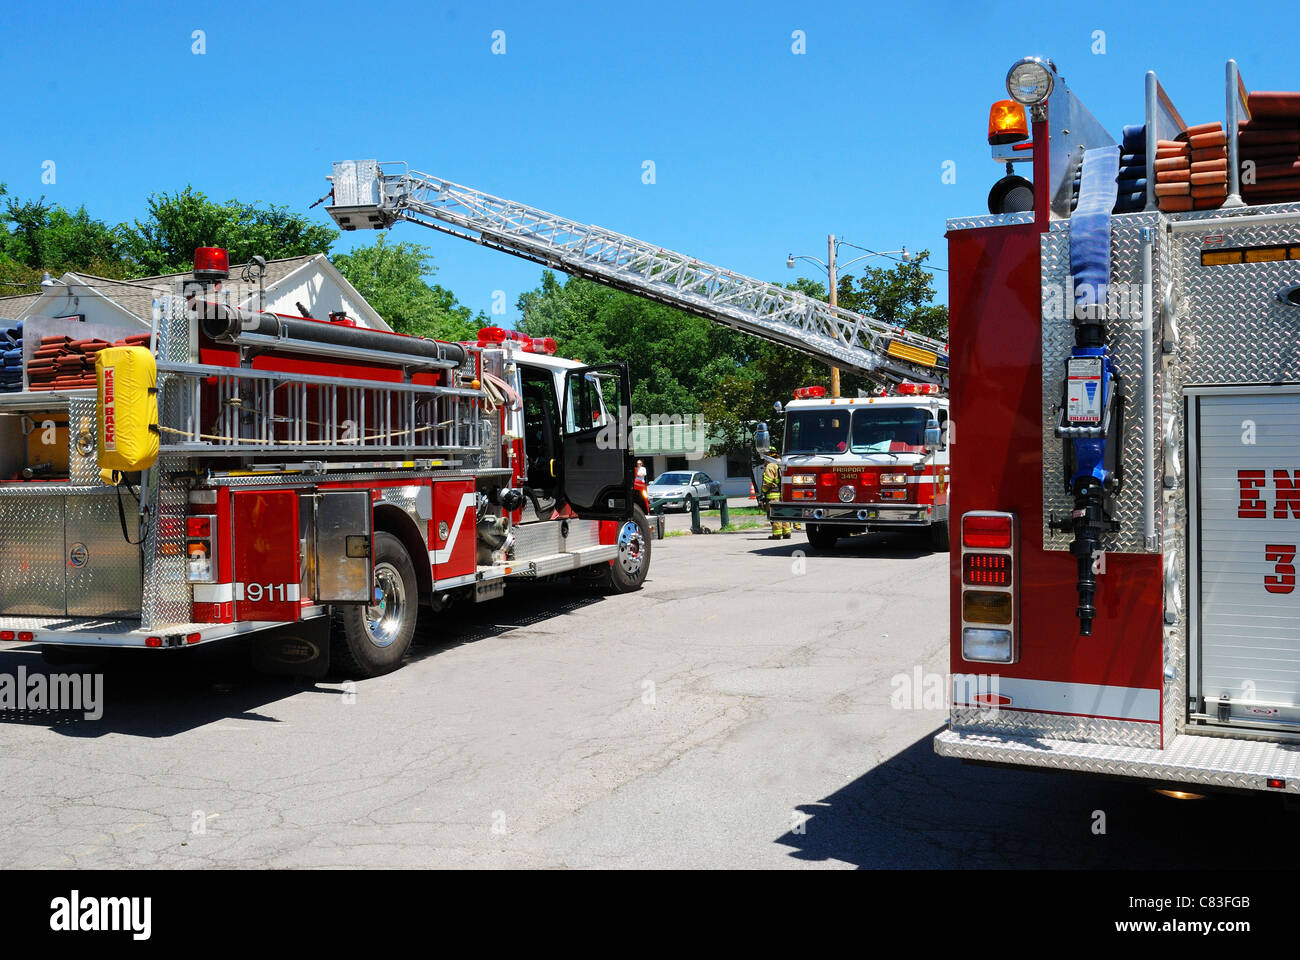 Fire engines respond to possible fire in food store. Stock Photo